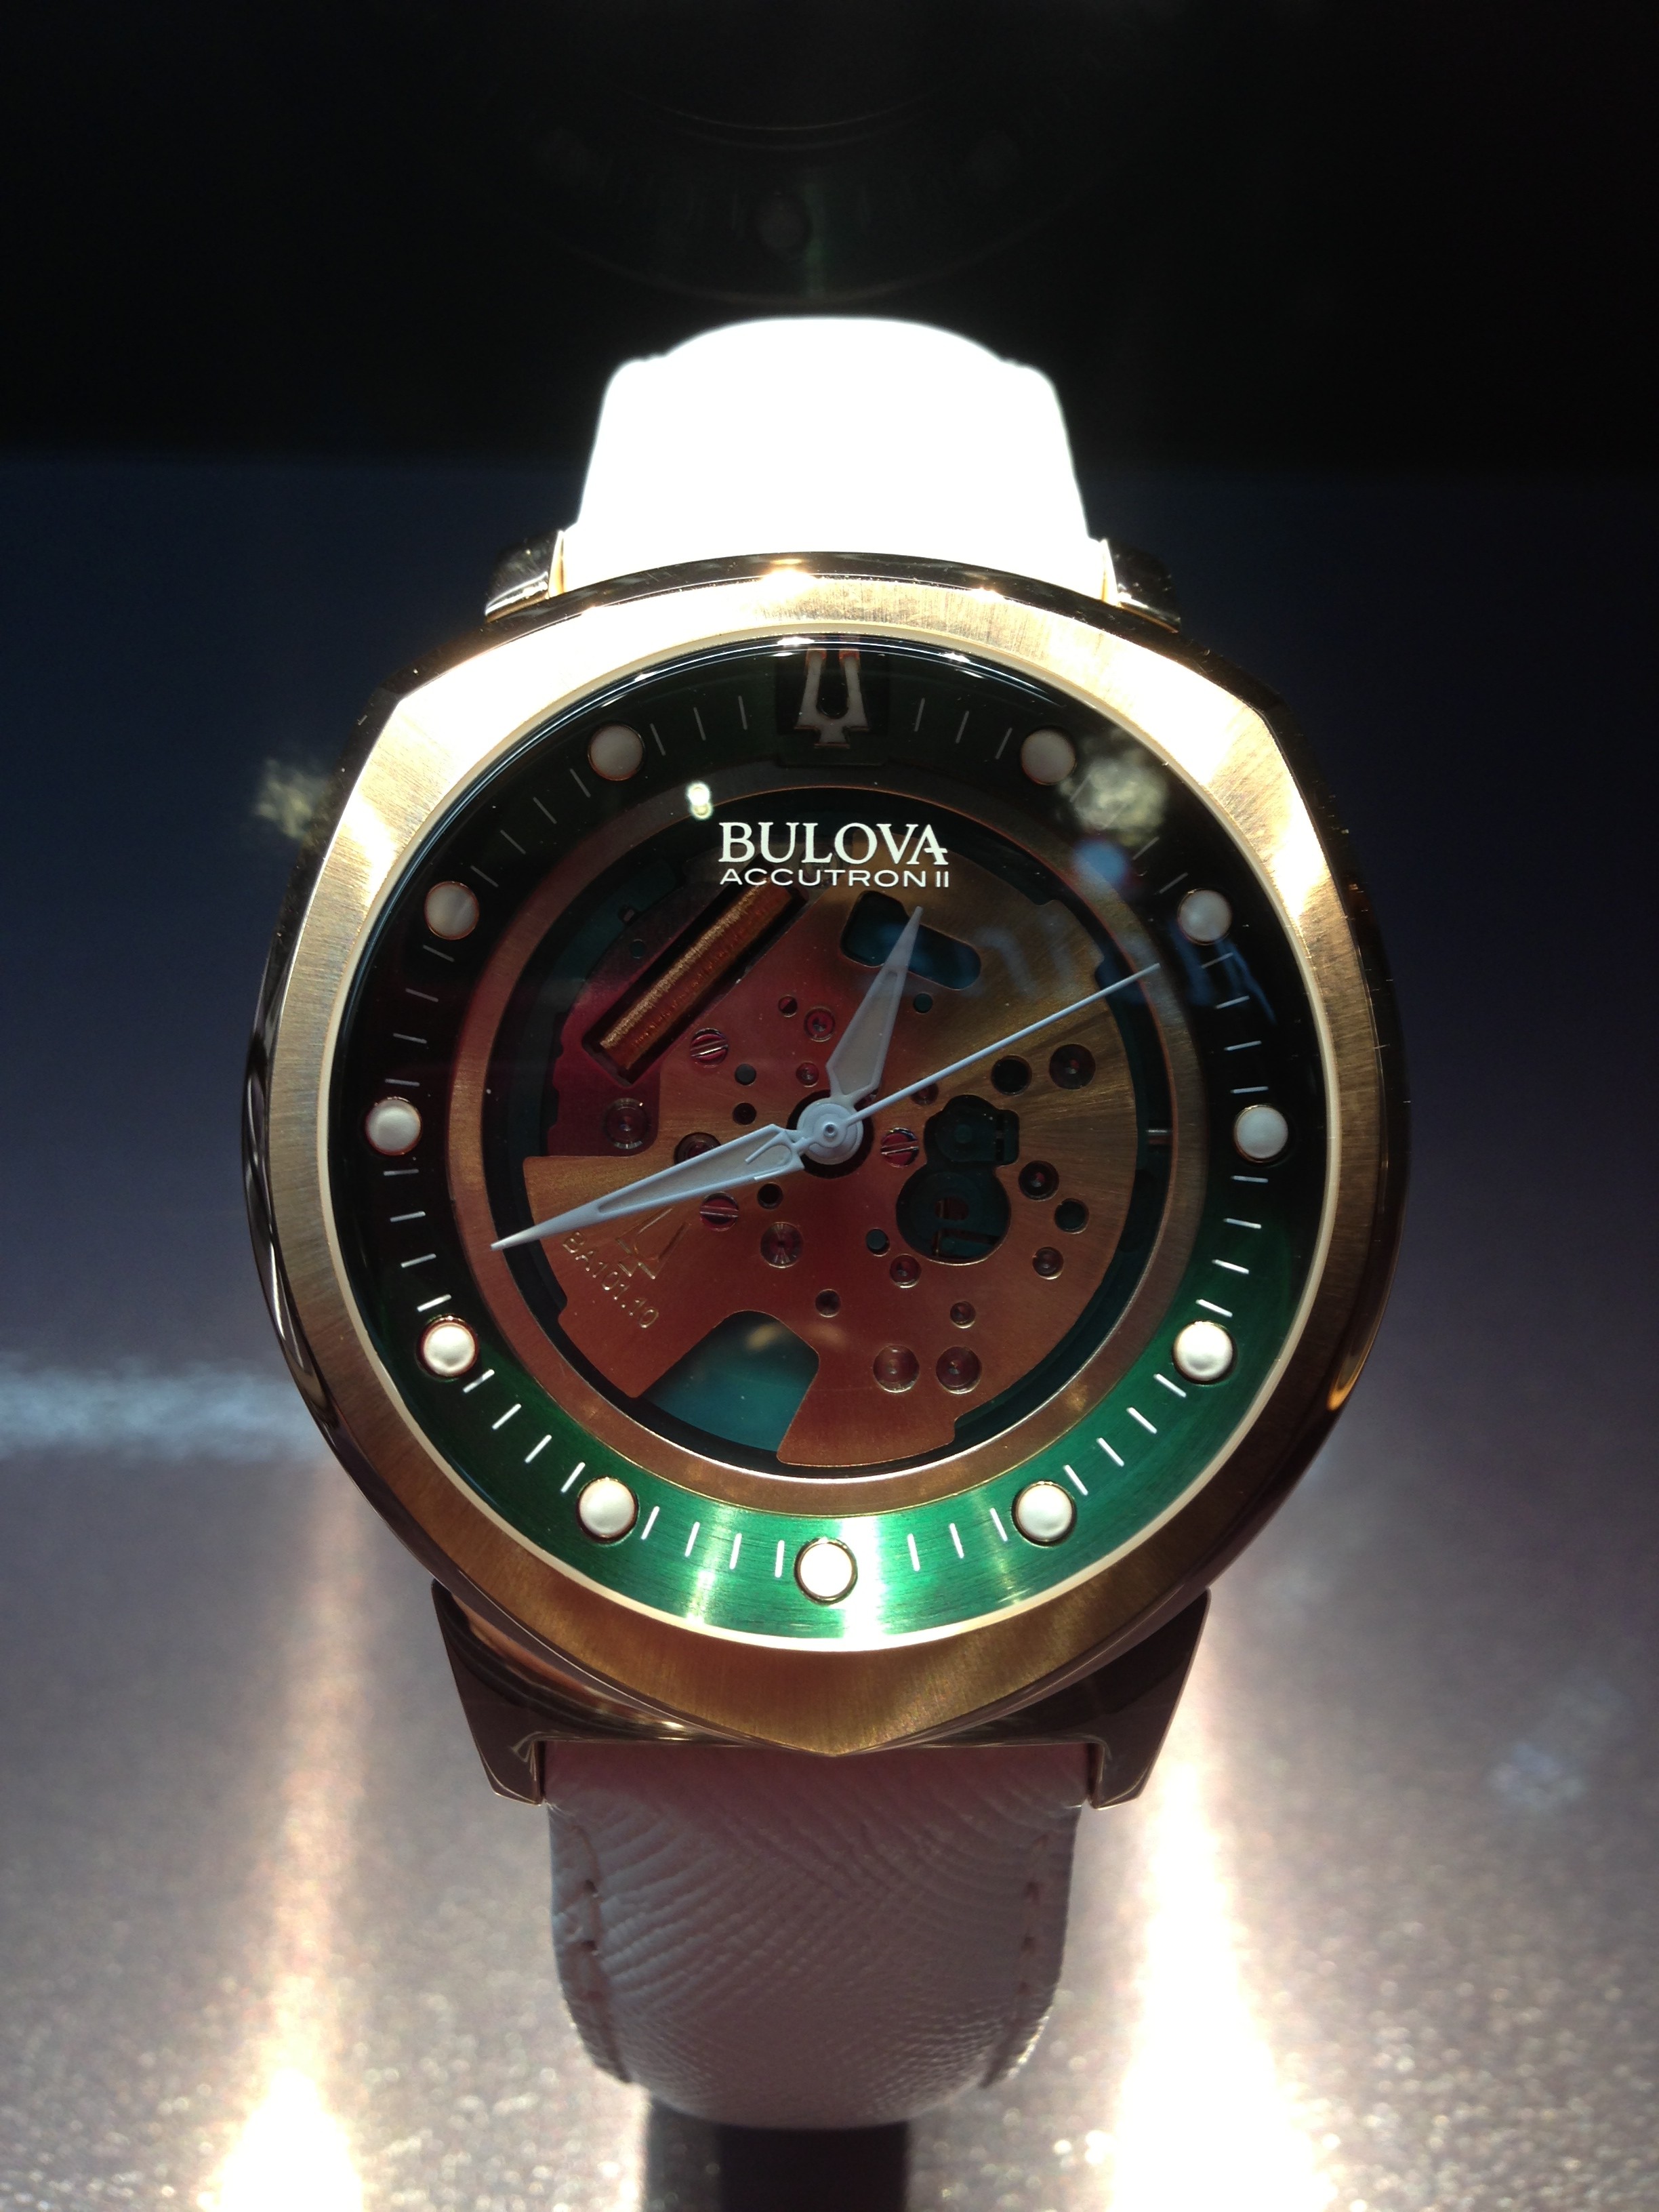 Super cool Watch from Bulova. Vintage style with an attitude. 